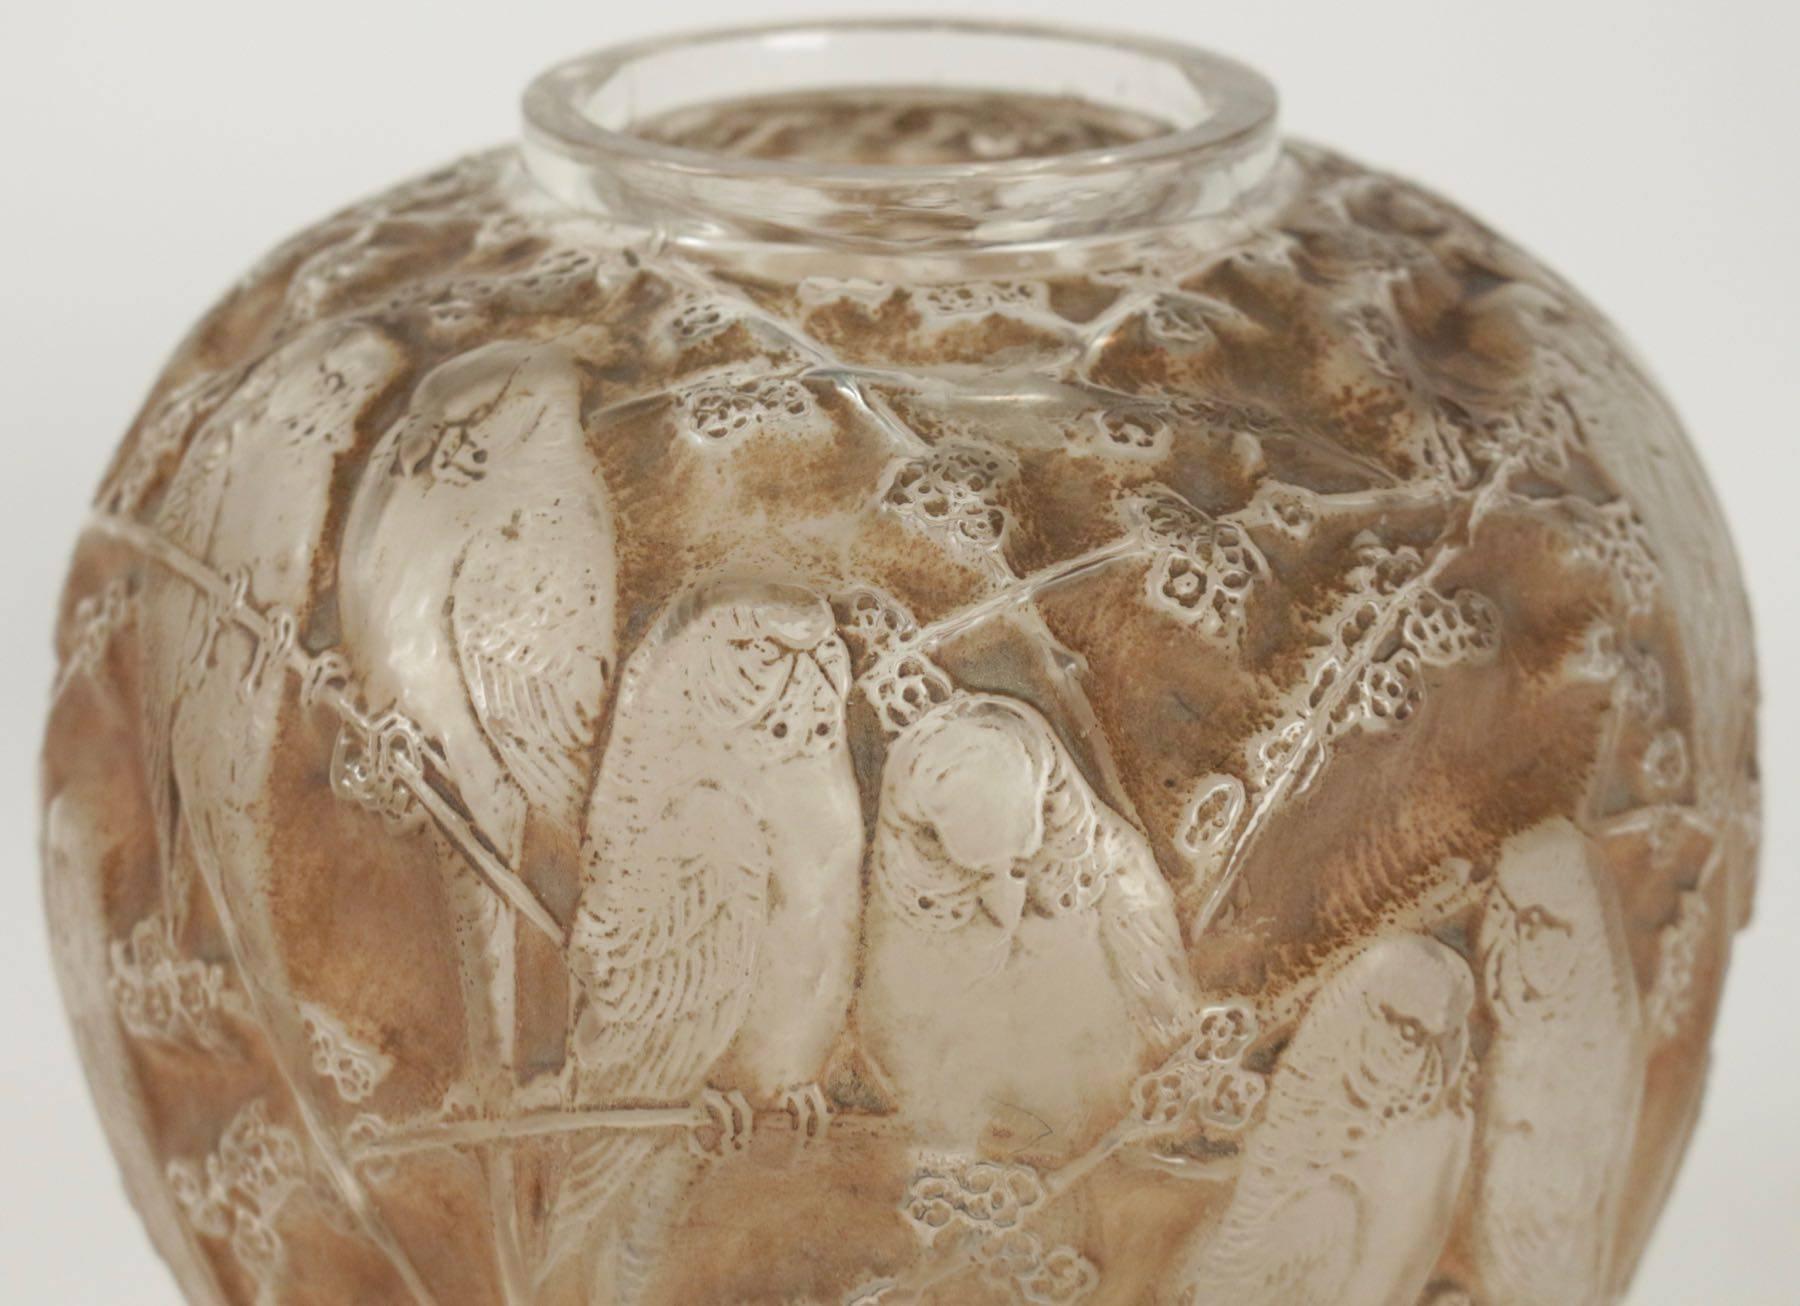 Rene Lalique (1860-1945).
Frosted glass highlighted it sepia stain decorated all-over with a design of pairs of small birds perched amongst foliage.
Model created in 1919. Measure: H 25.5 cm.
